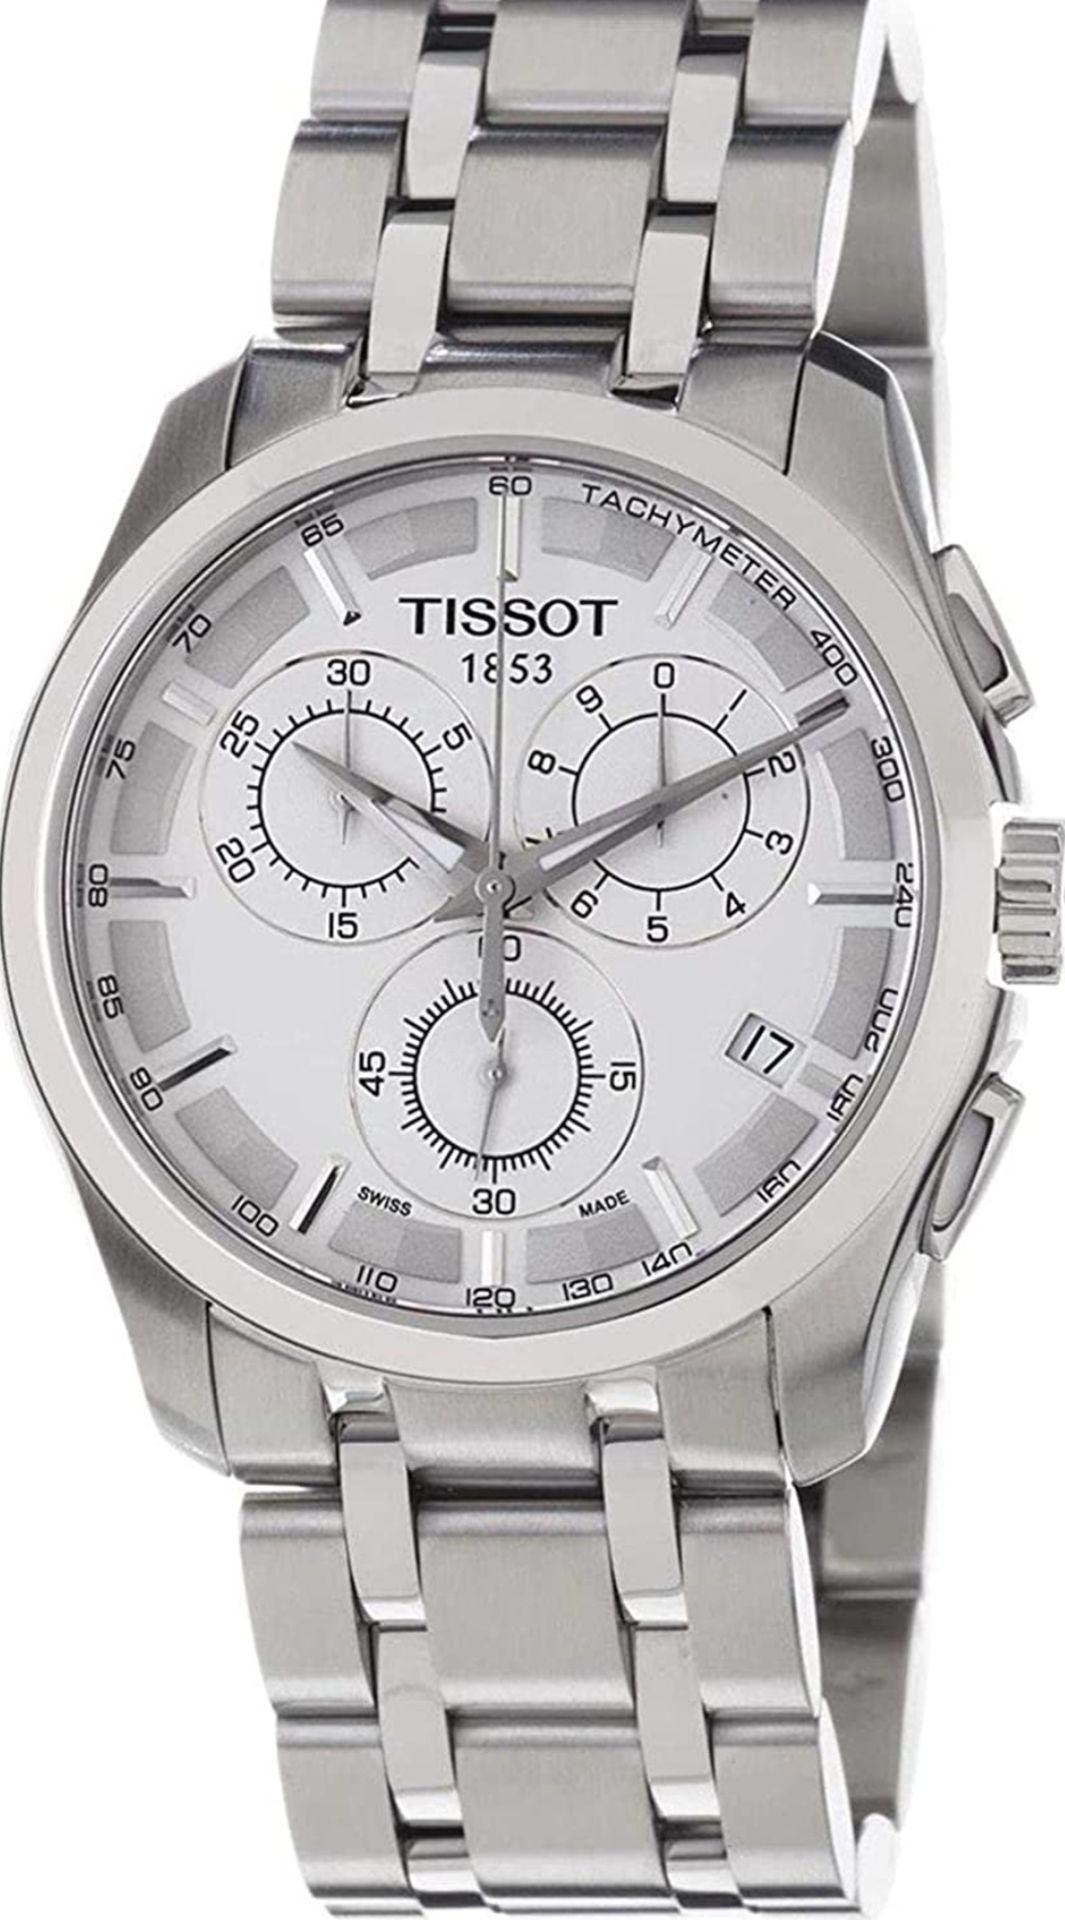 Tissot T035.617.11.031.00 Couturier Stainless Steel Men's Watch - Image 2 of 4